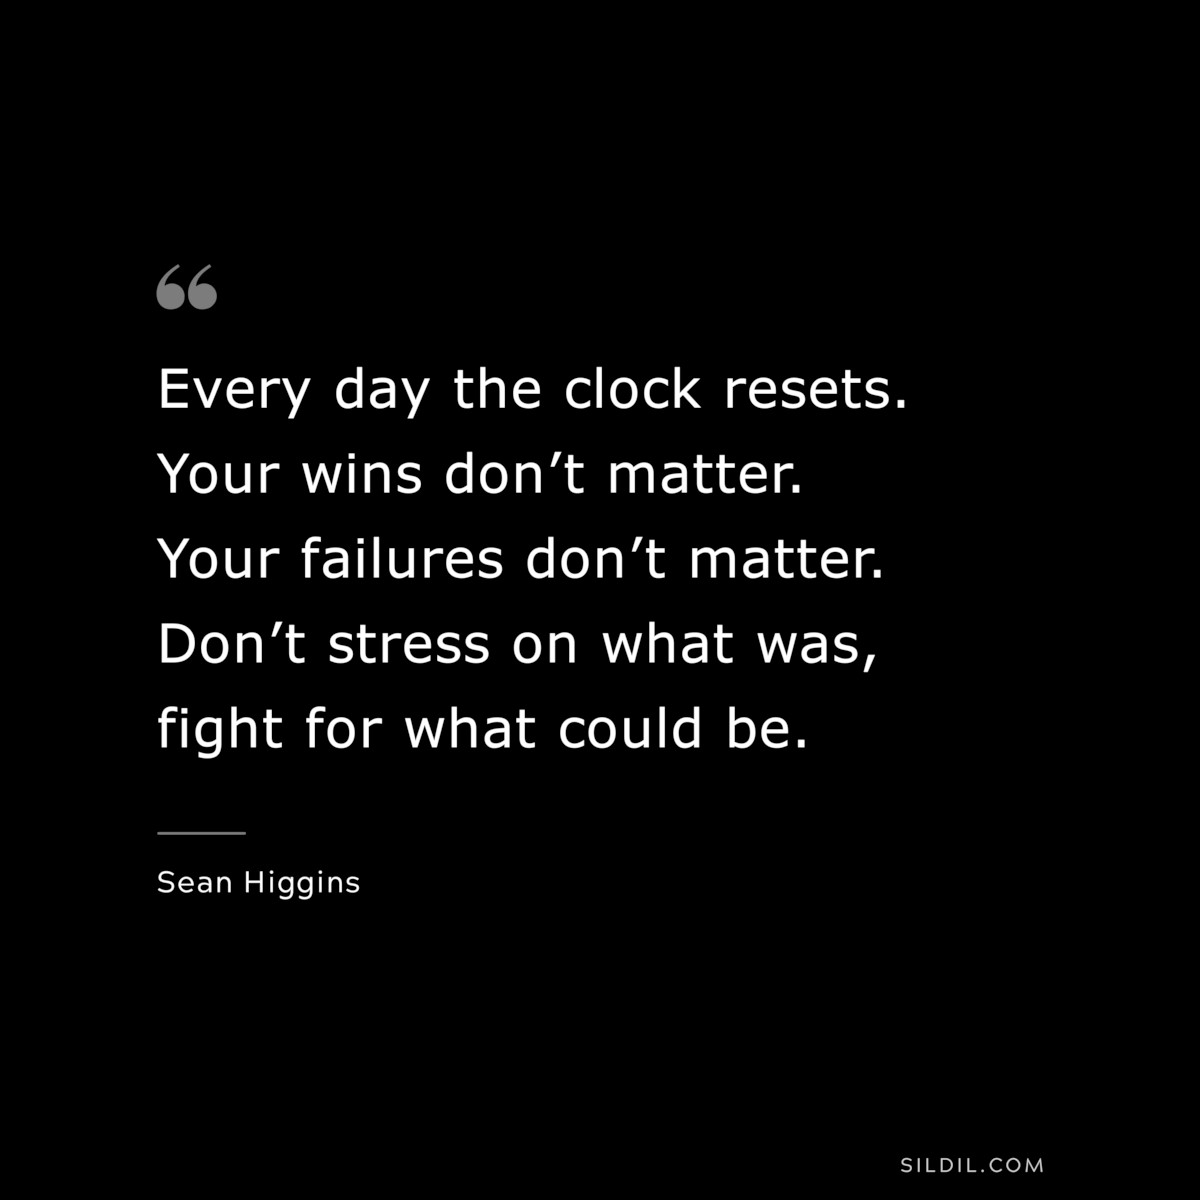 Every day the clock resets. Your wins don’t matter. Your failures don’t matter. Don’t stress on what was, fight for what could be. ― Sean Higgins